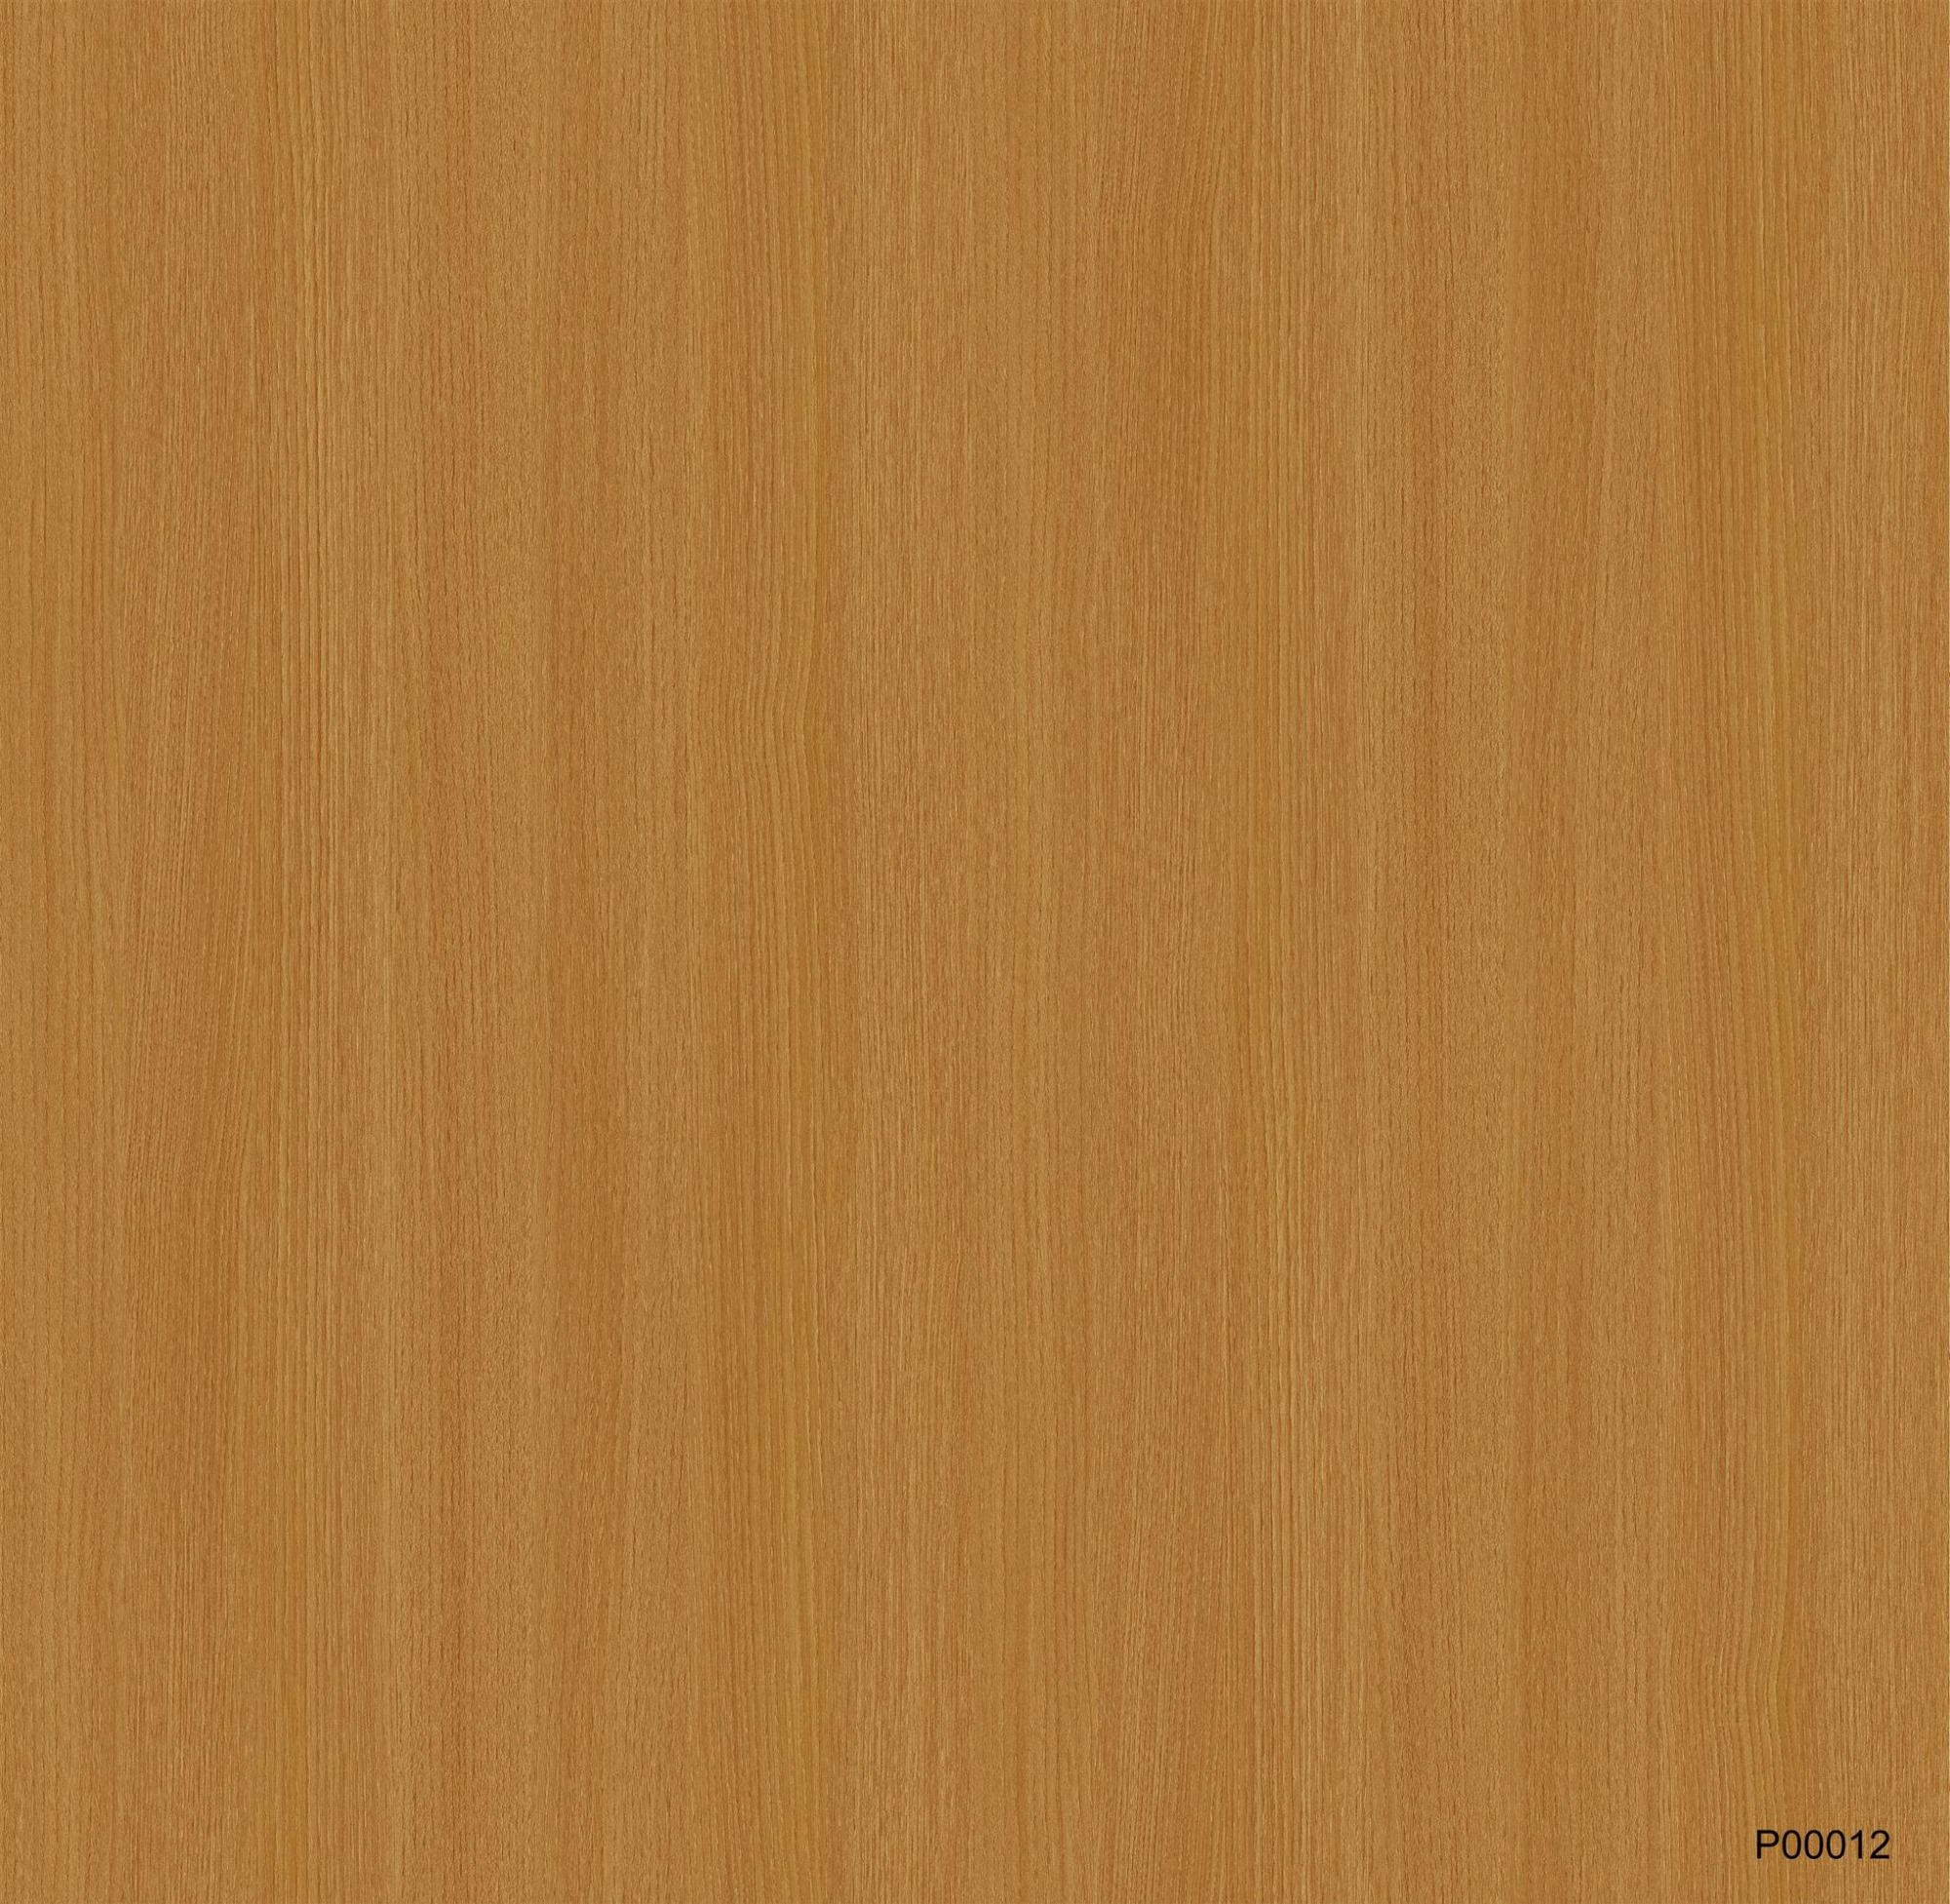 H00012 Melamine paper with wood grain